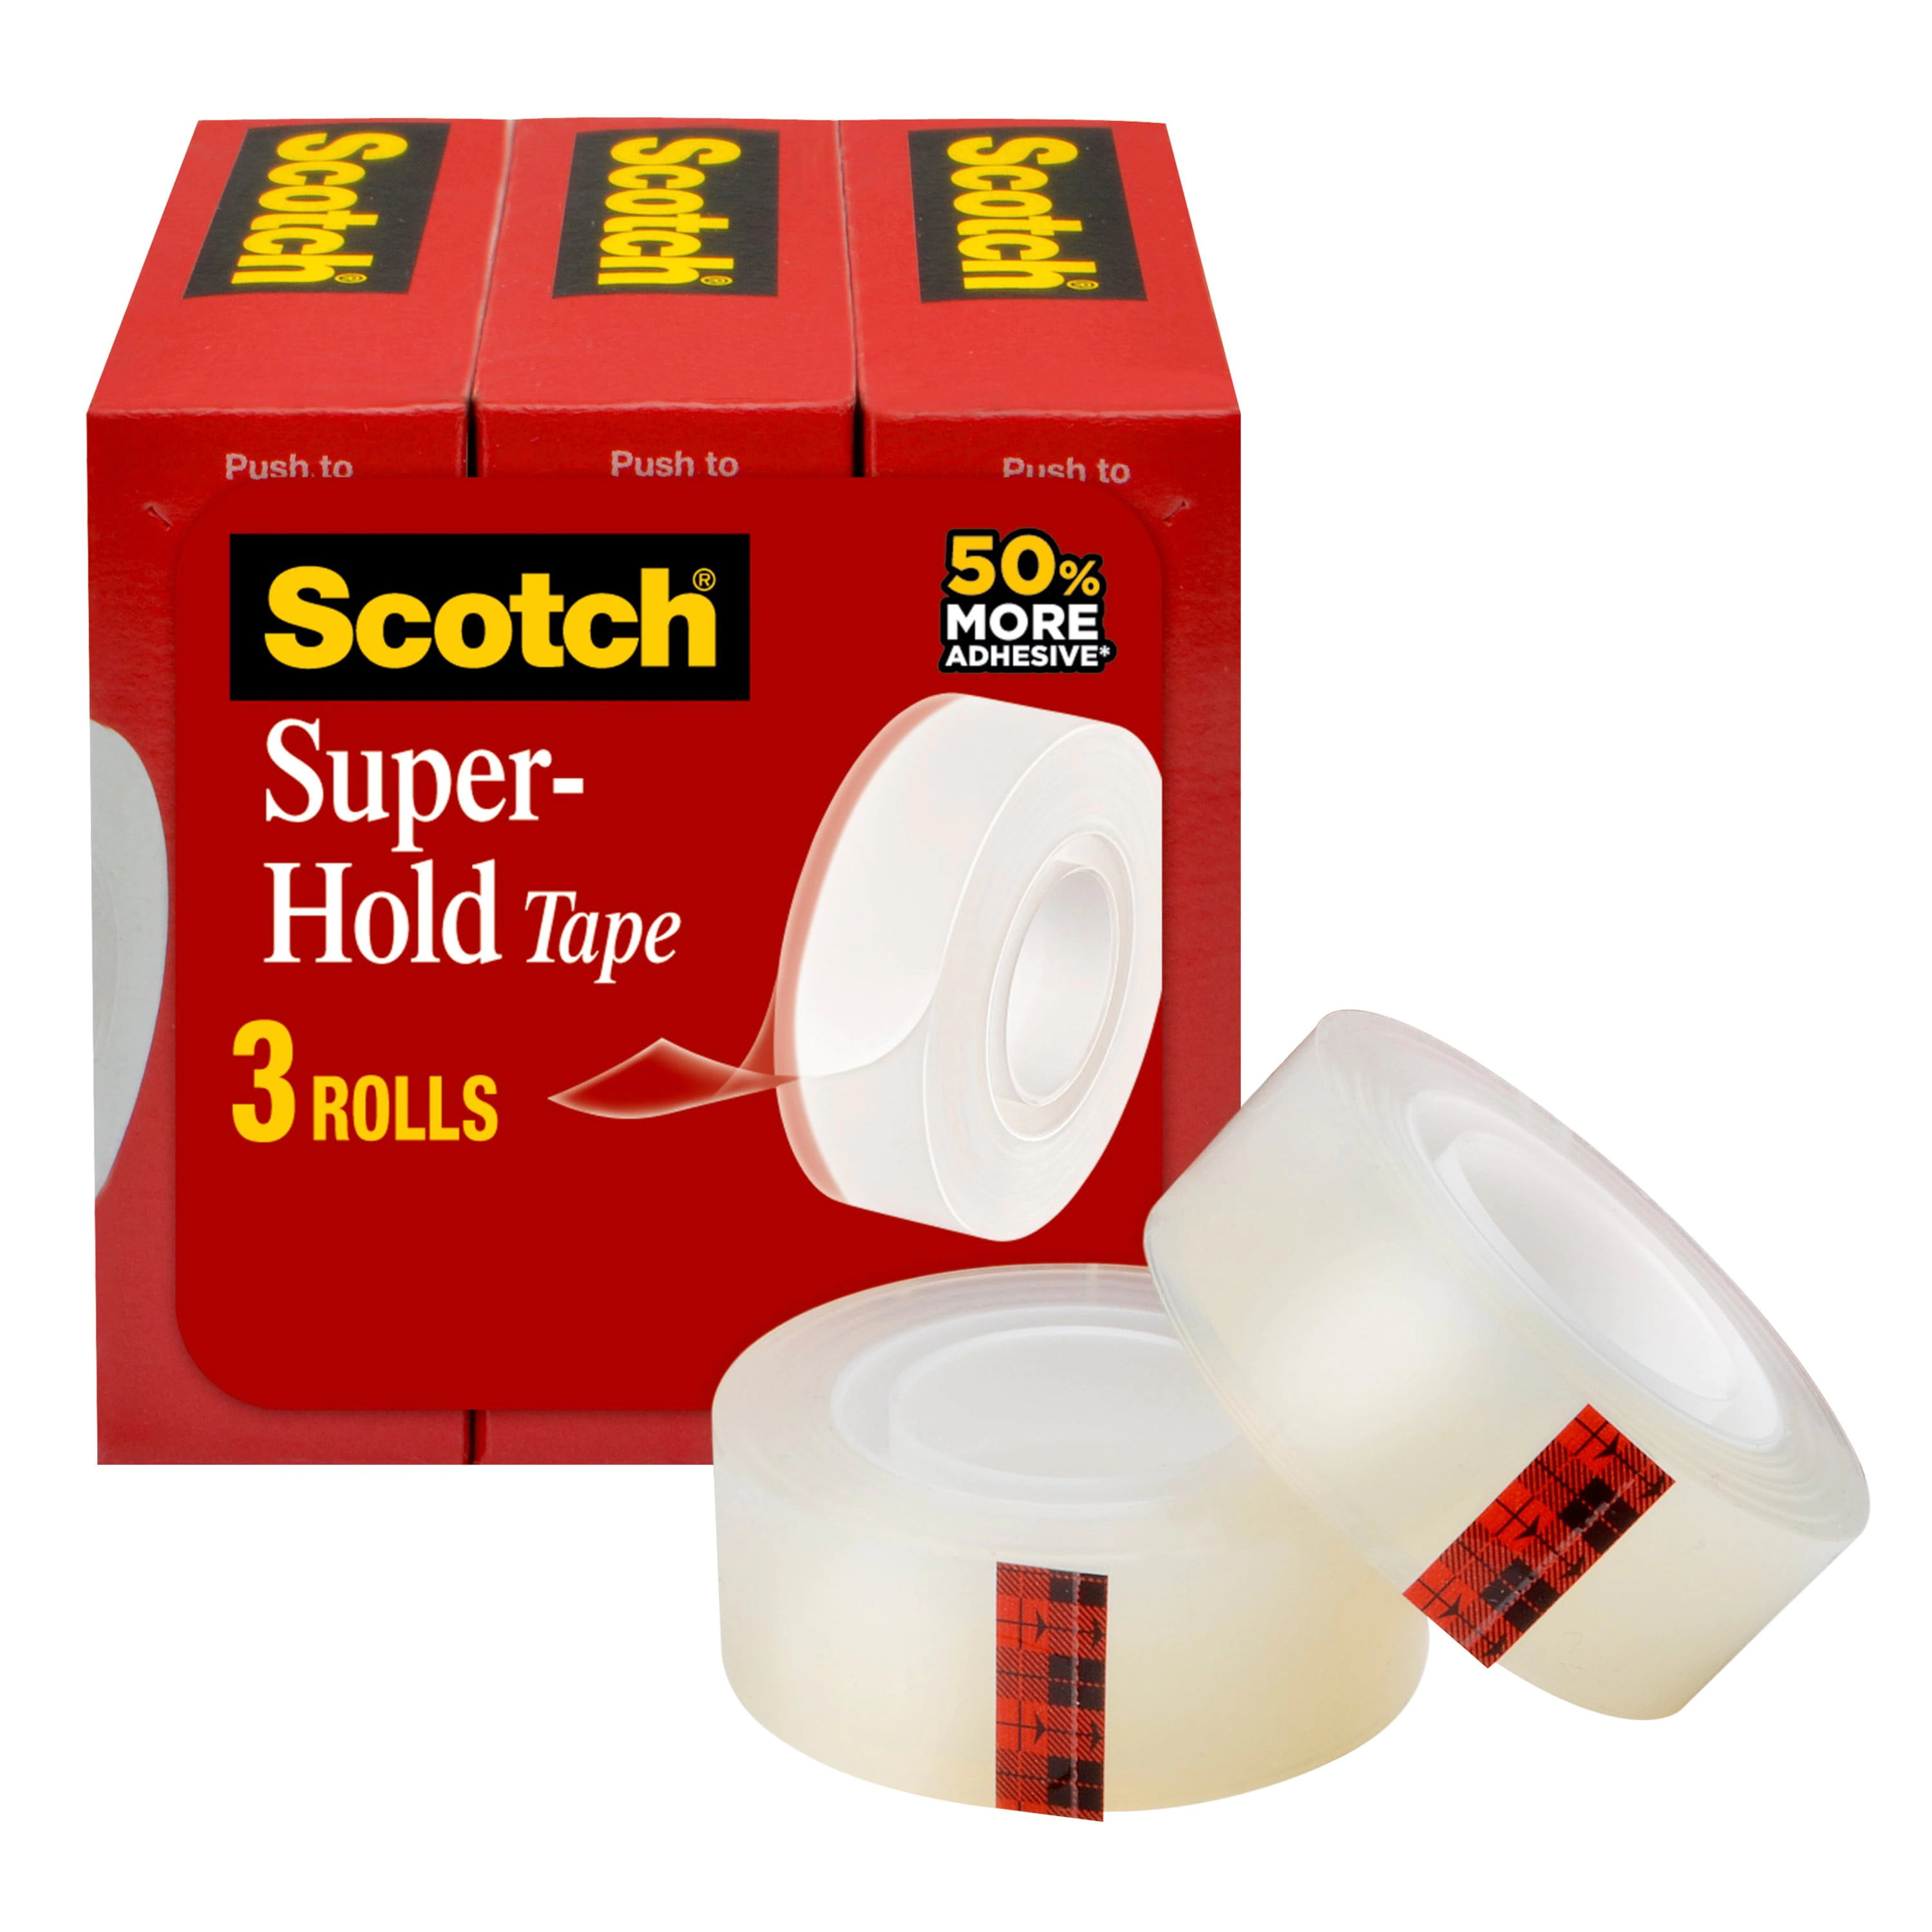 Dispensered 50% More Adhesive Trusted Favorite 4 Rolls 3./4 x 650 Inches 4198 Transparent Finish Scotch Super-Hold Tape - 1 Pack 